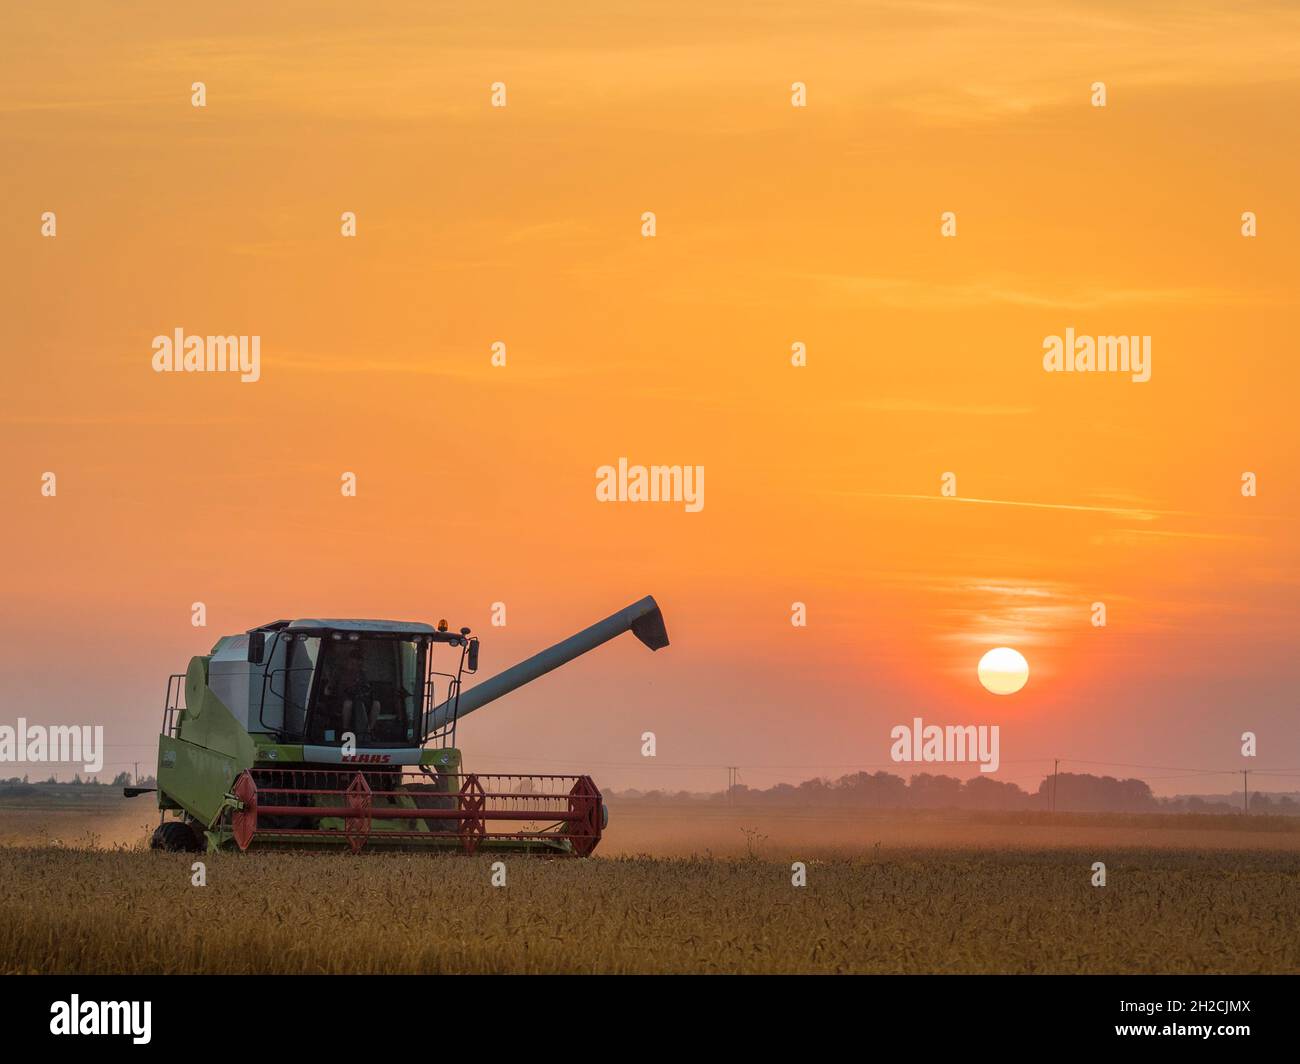 Combine harvester in wheat field at sunset, Cambridgeshire, England Stock Photo